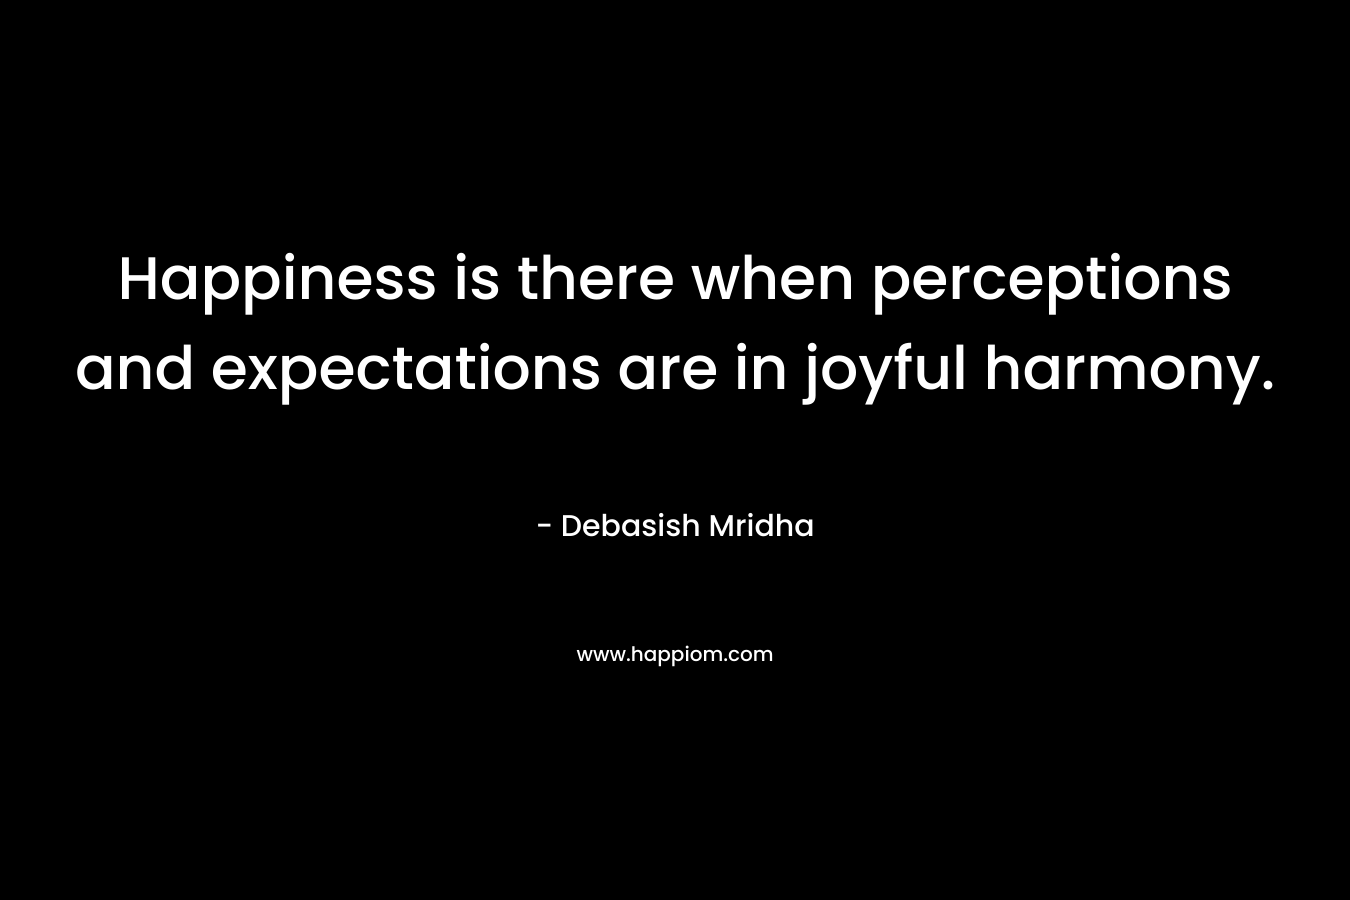 Happiness is there when perceptions and expectations are in joyful harmony. – Debasish Mridha